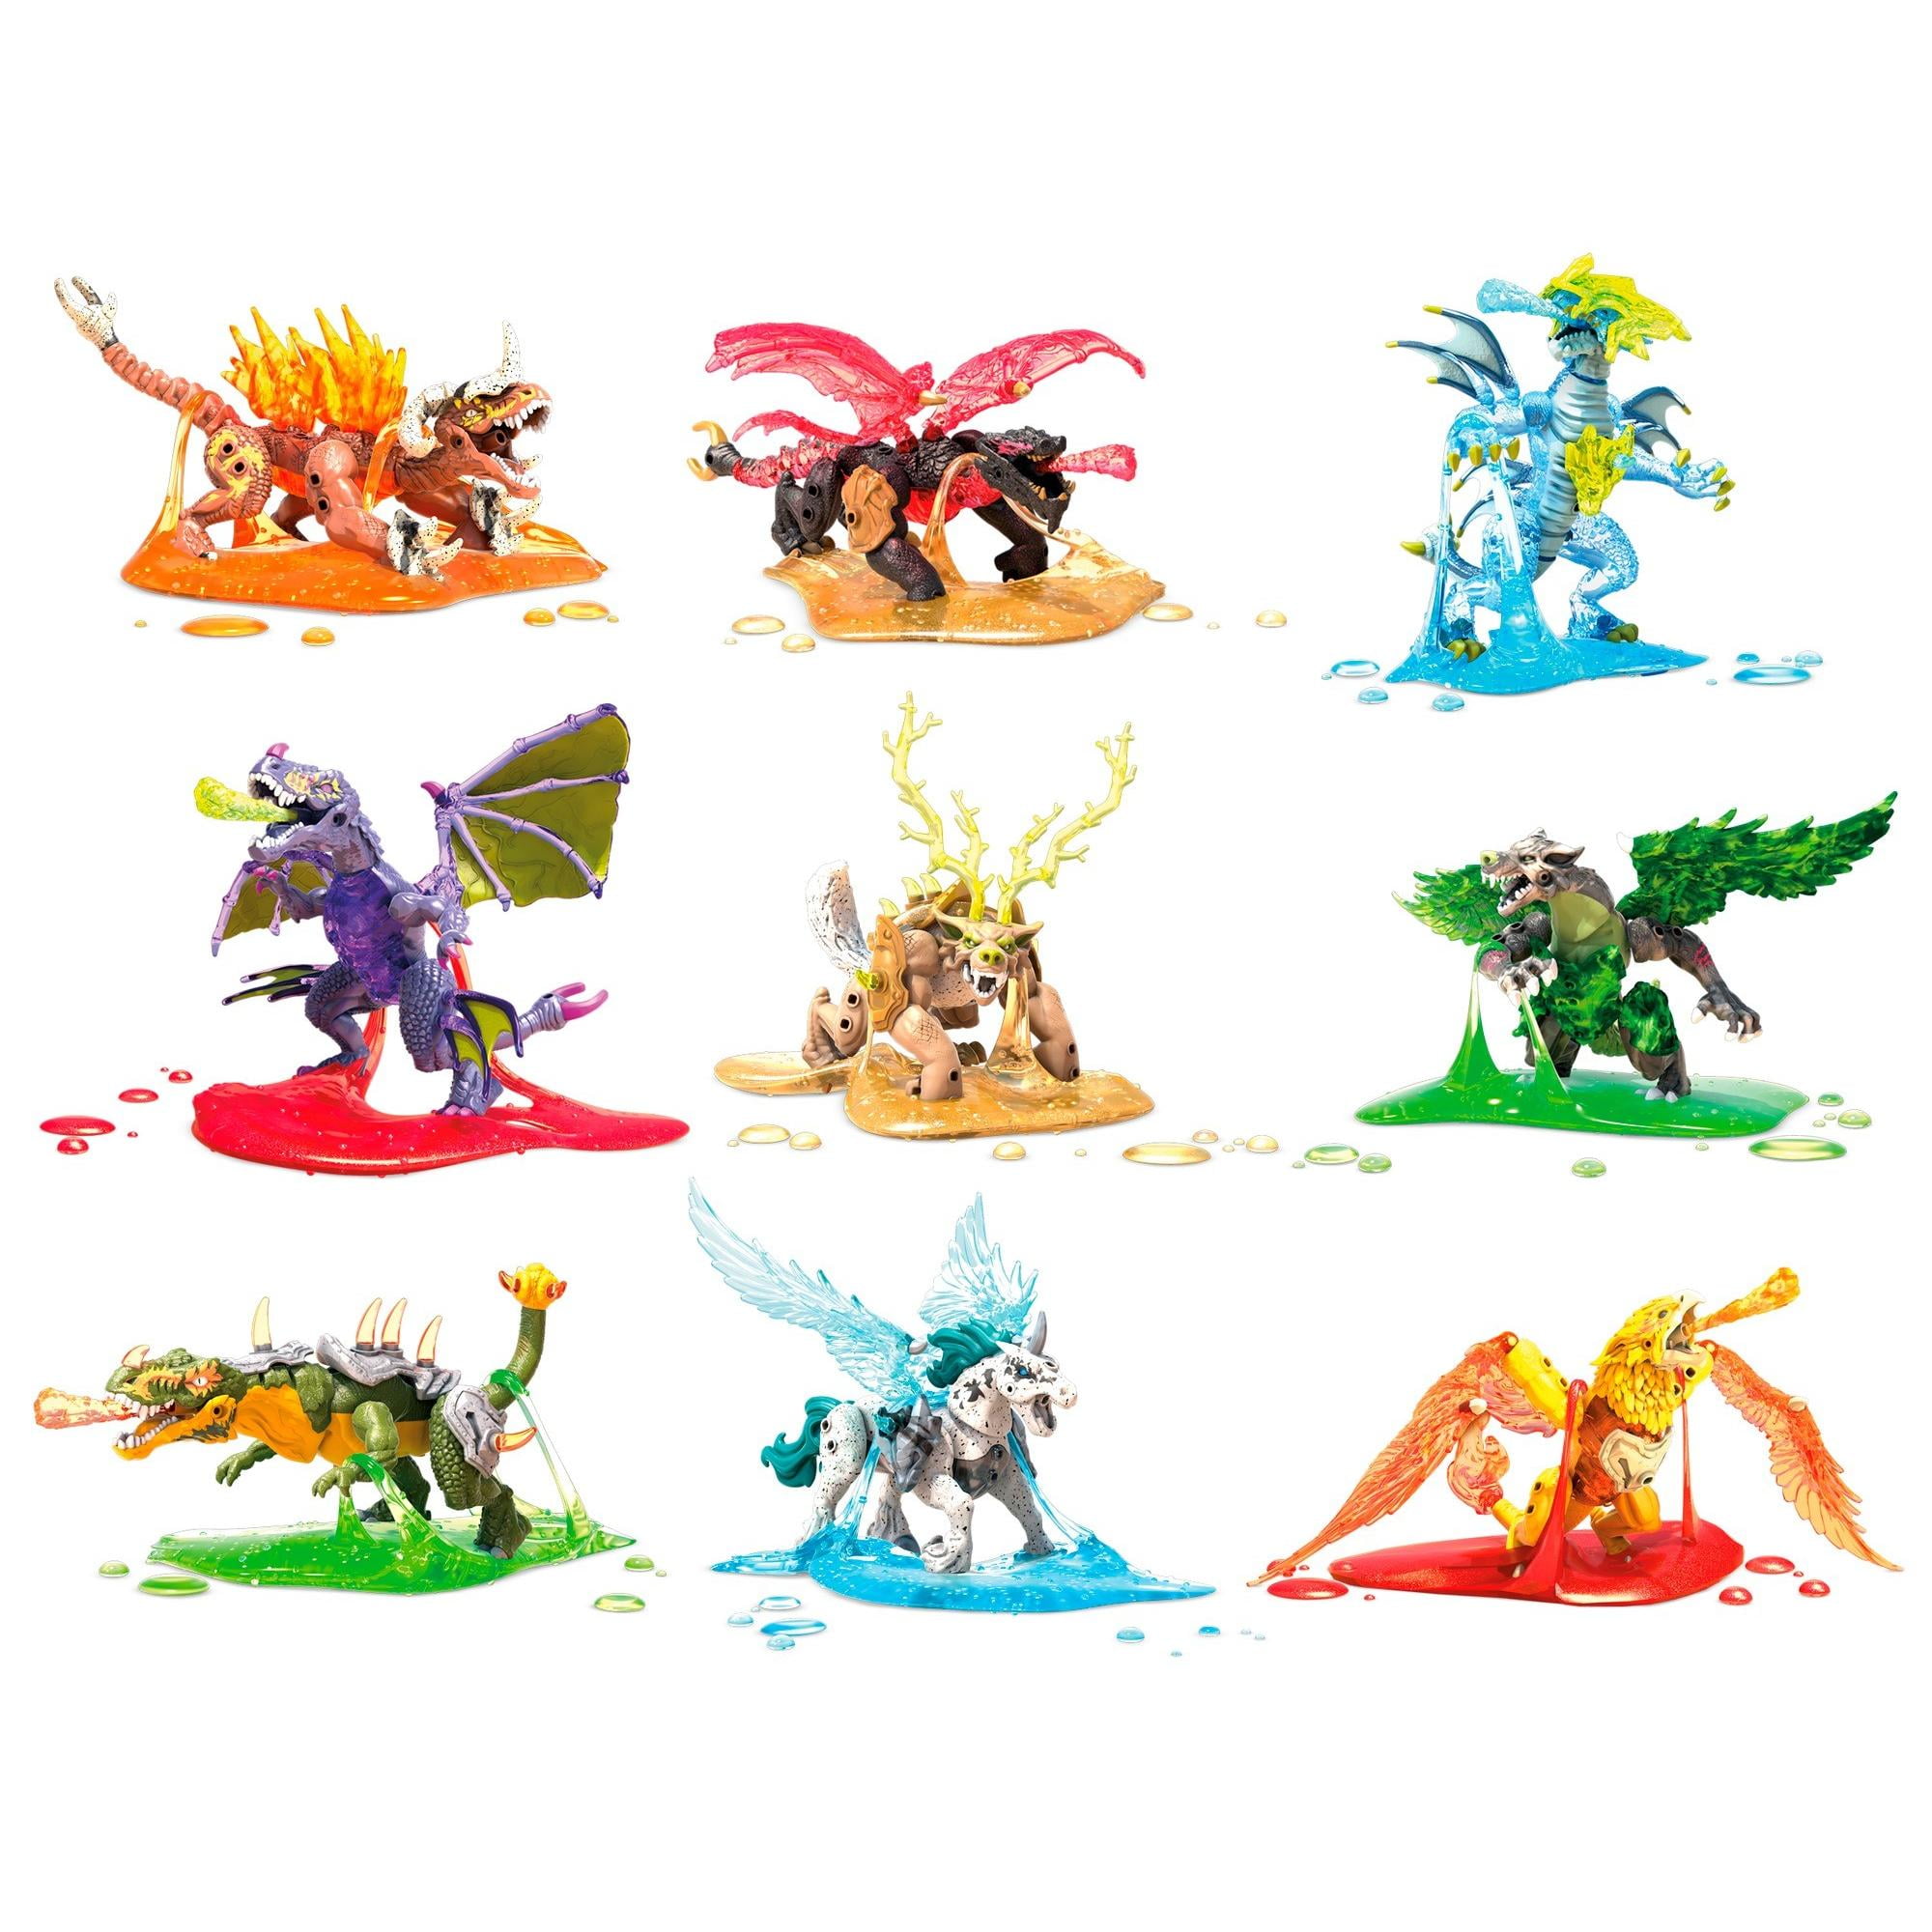 X2 MEGA Construx Breakout Beasts Styles May Vary Wave 1 for sale online 